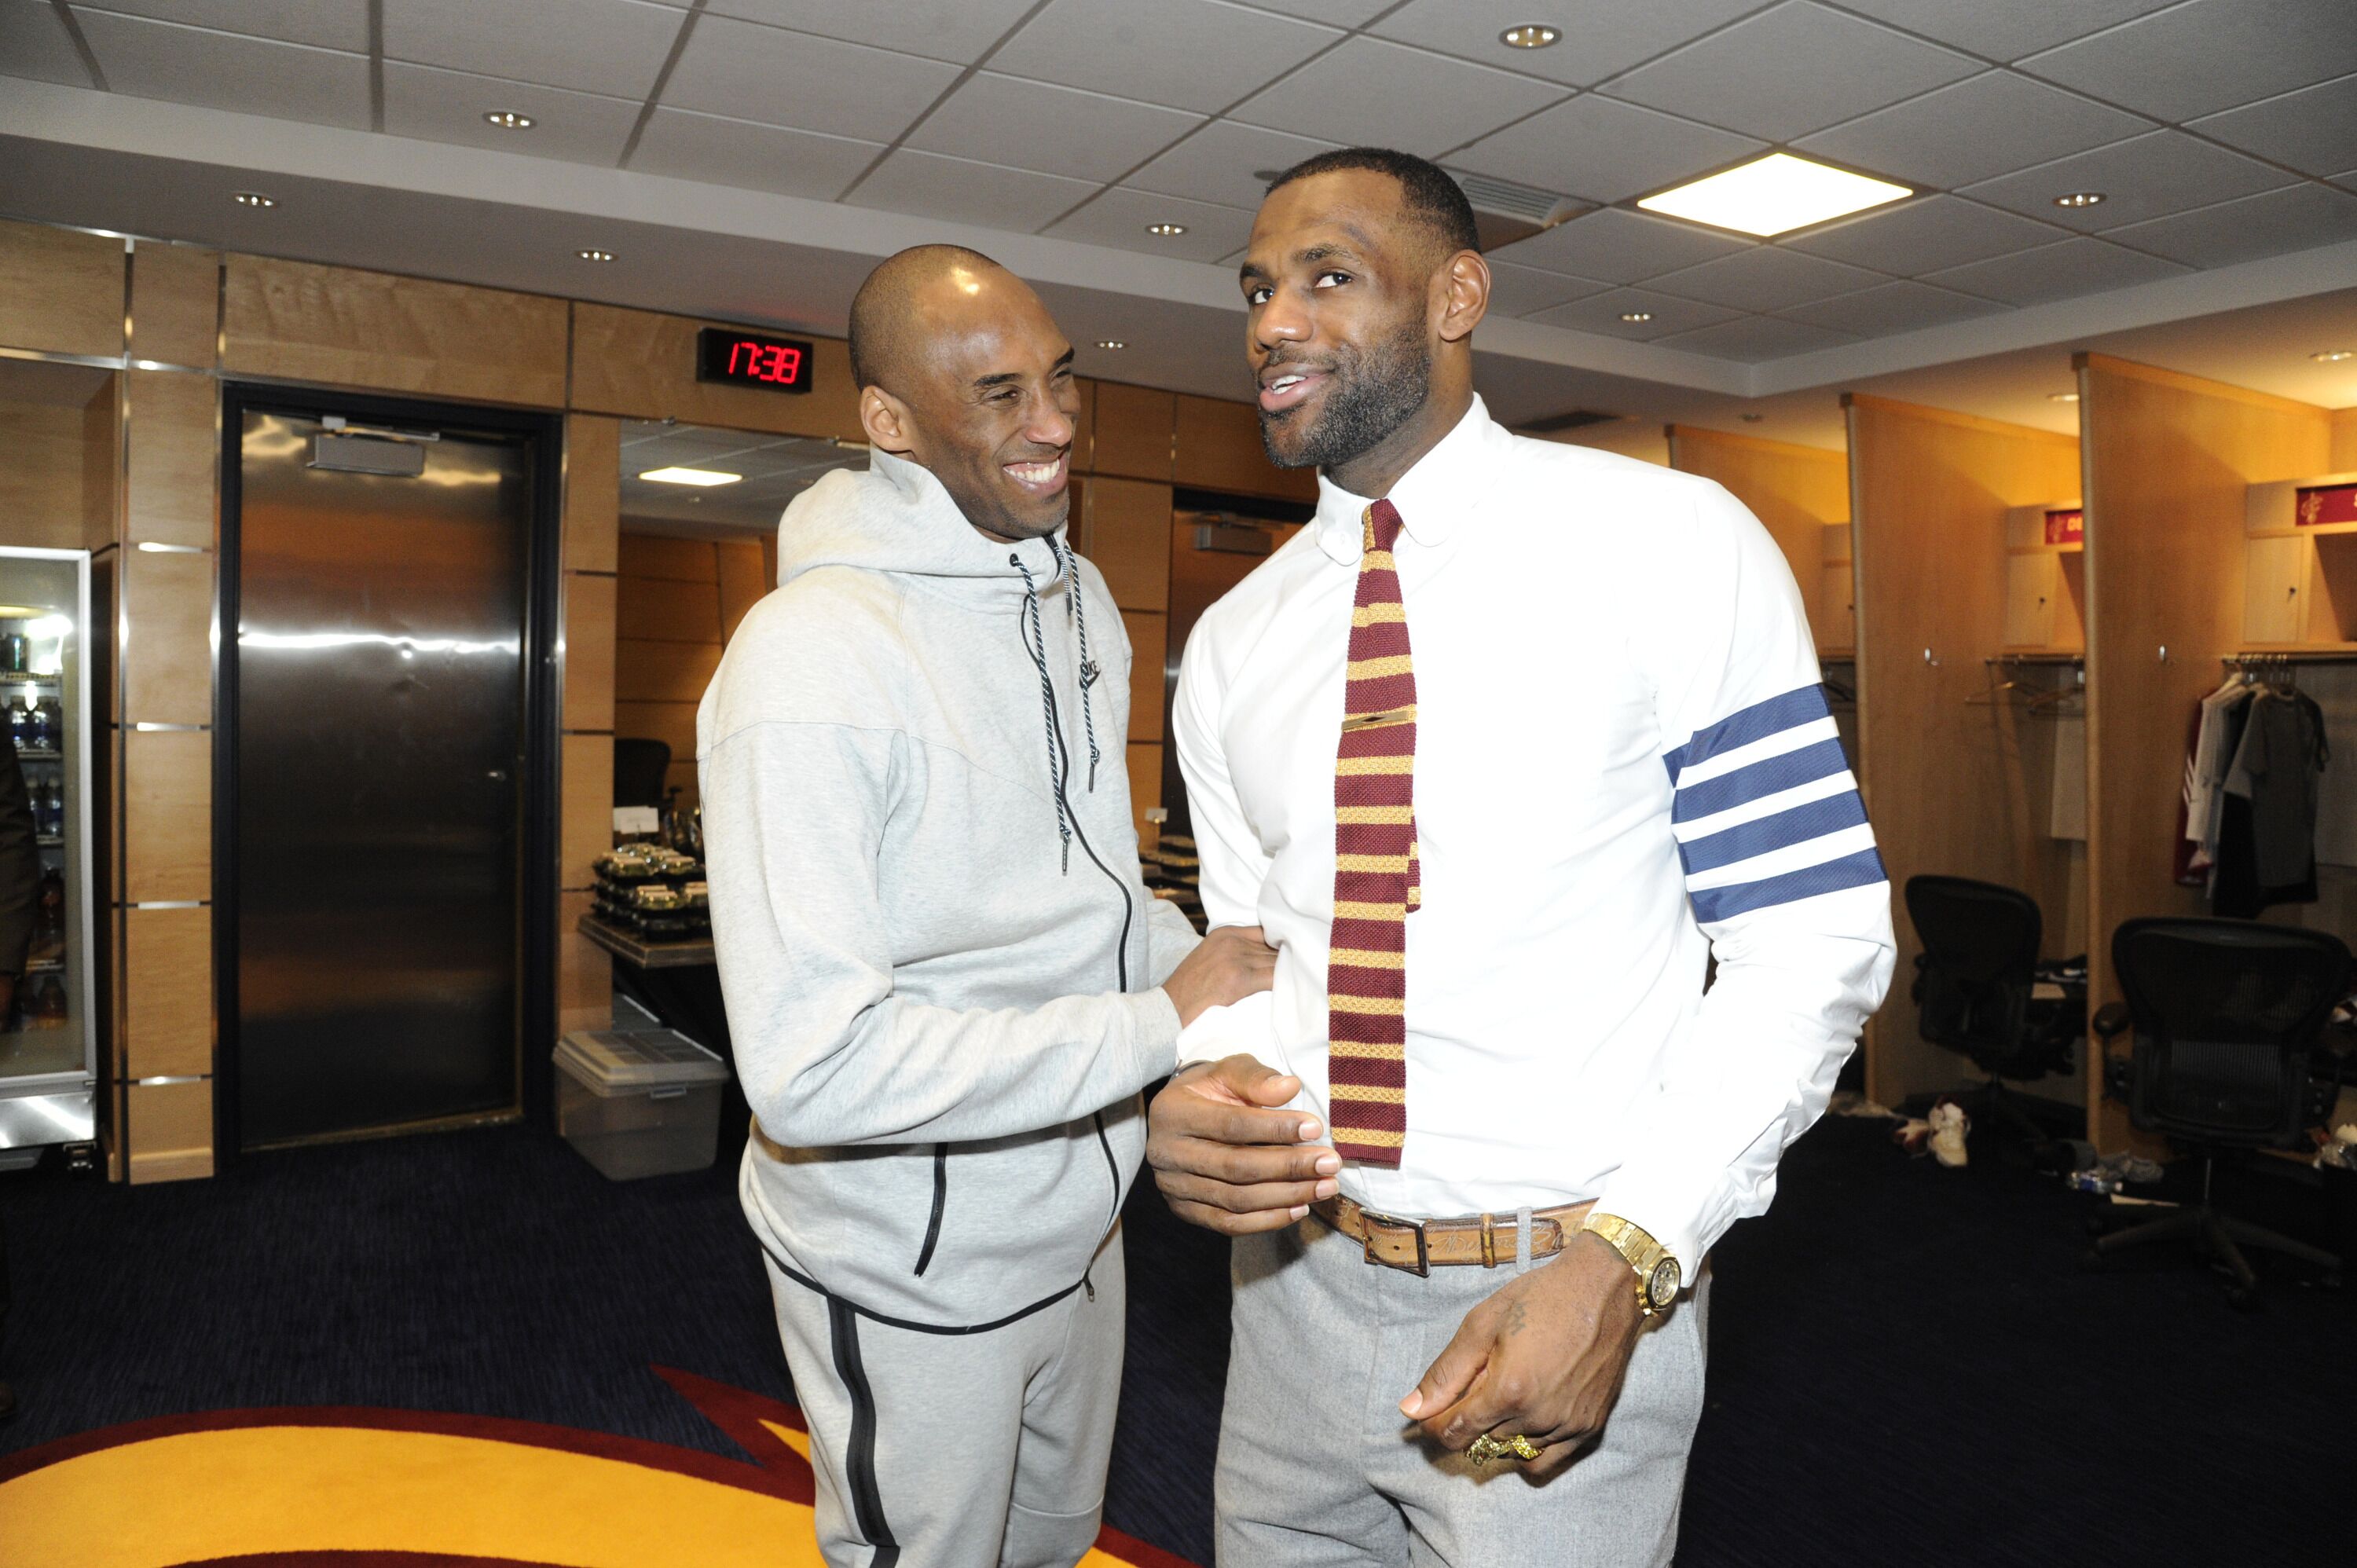 Kobe Bryant #24 of the Los Angeles Lakers greets LeBron James #23 of the Cleveland Cavaliers in the locker room after the game at The Quicken Loans Arena in Cleveland, Ohio | Photo: Getty Images